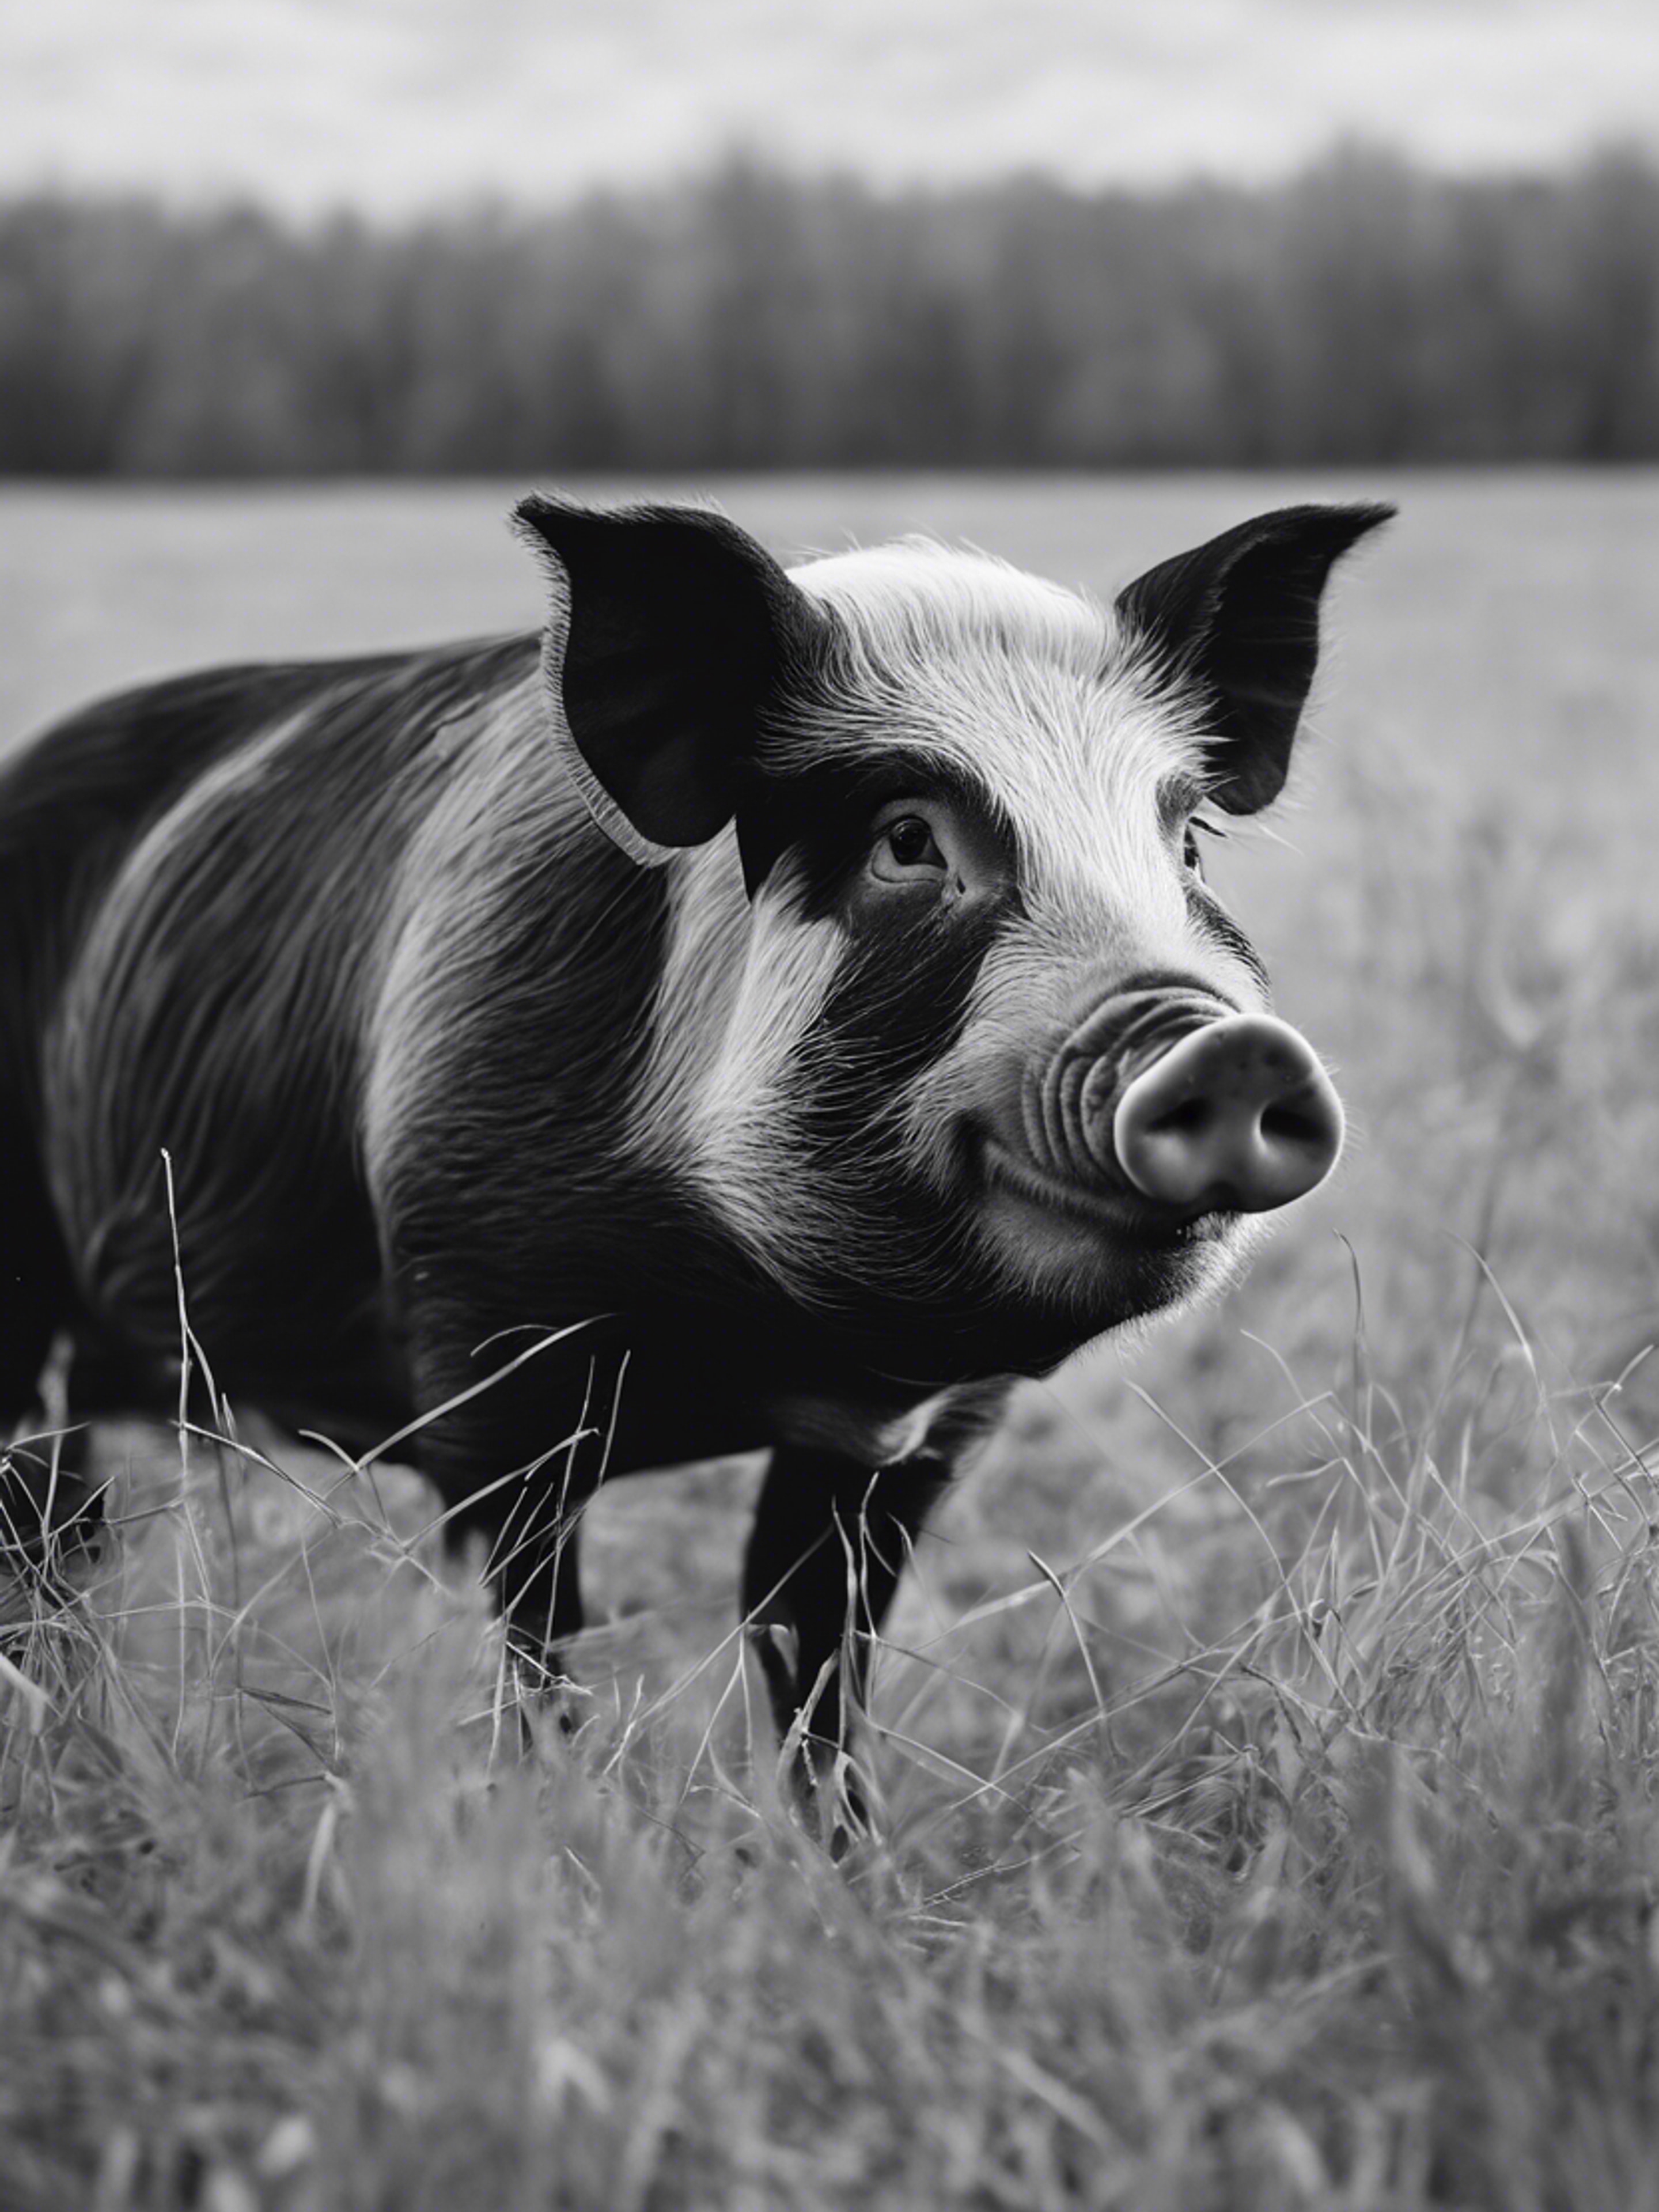 A black and white pig with clean fur, captured in a country meadow during tranquility of winter. Wallpaper[700eb497dc0e43a8b530]